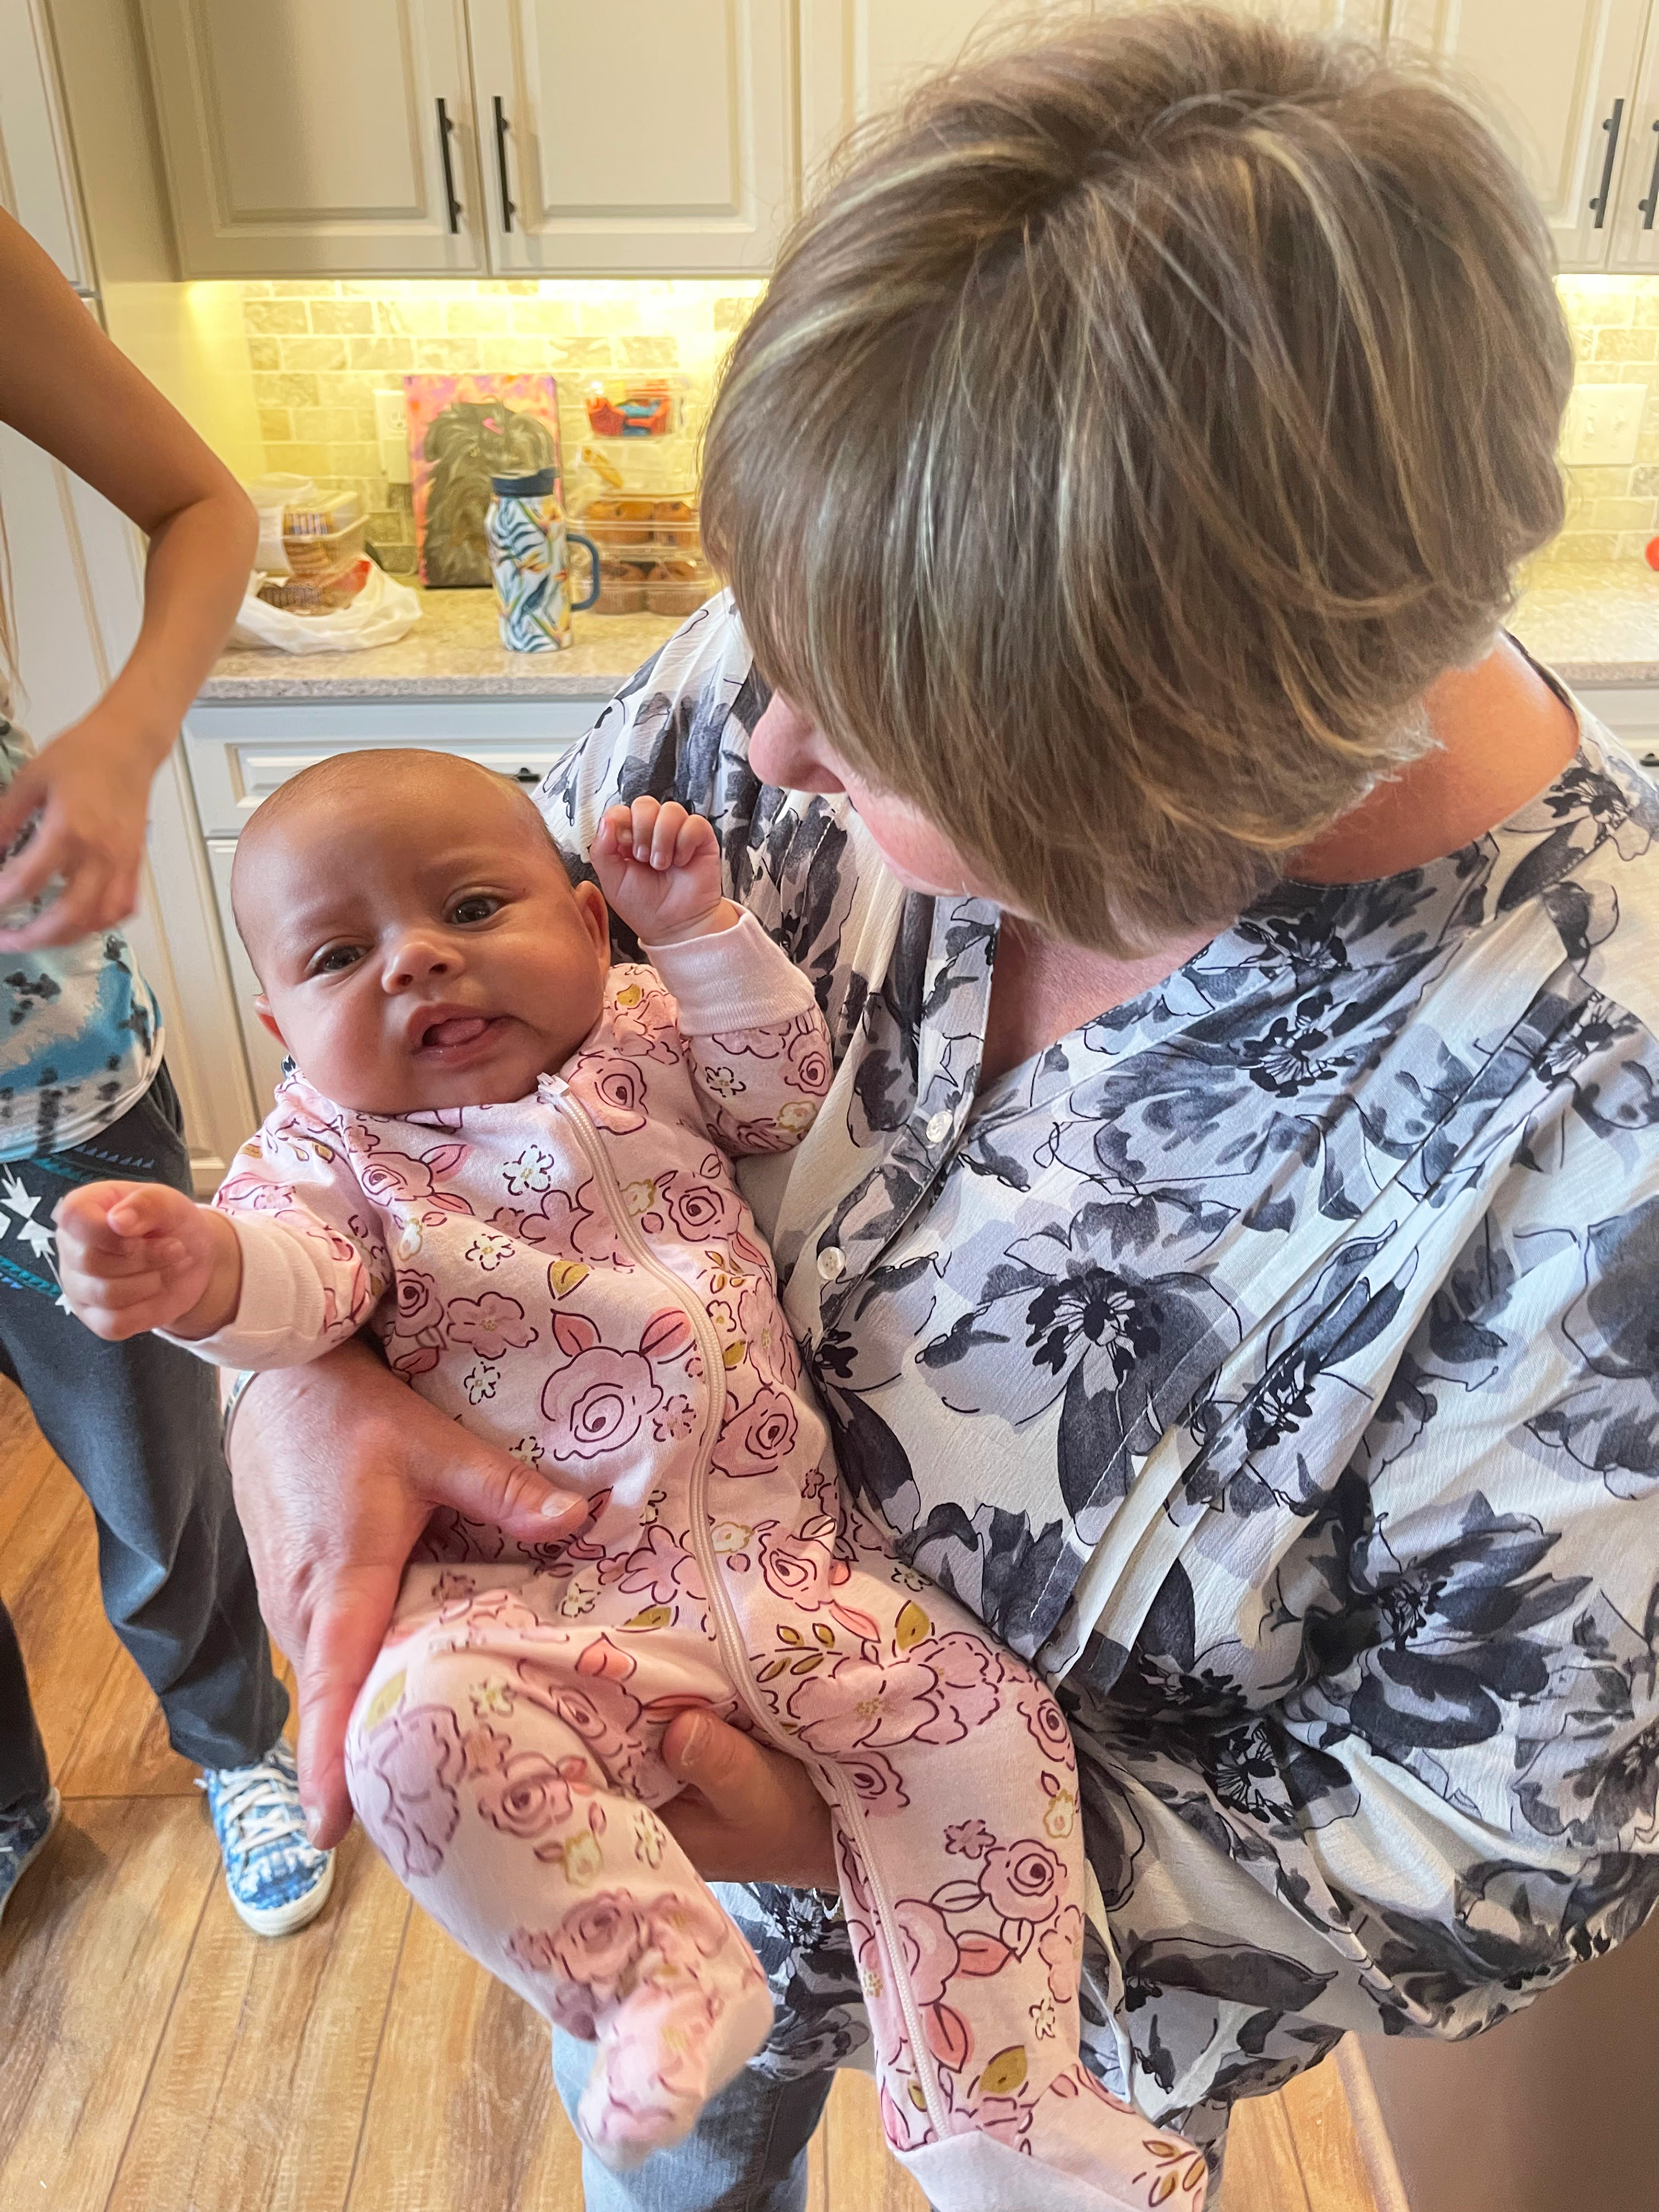 A photo shows Geralyn Laurie holding her granddaughter, Aubrey.